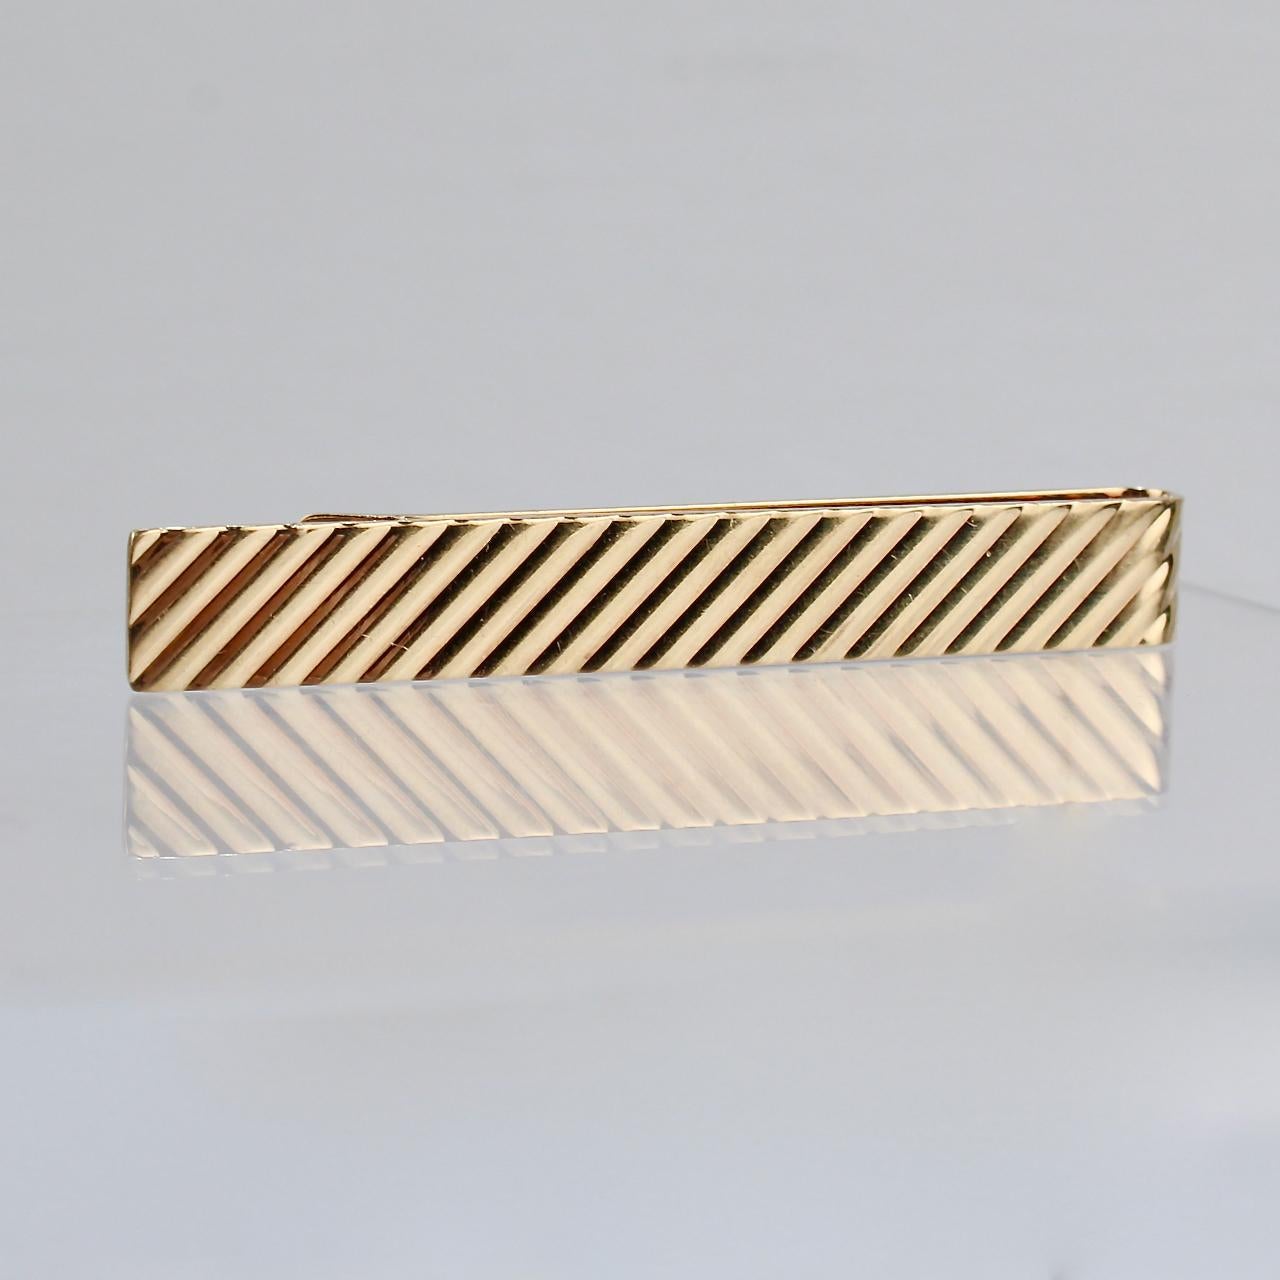 A handsome Tiffany & Co. tie clip in 14K gold.

The tie bar features a repeating diagonal stripe pattern. 

Simple and elegant design from Tiffany!

Date:
Mid-20th Century

Overall Condition:
It is in overall good, as-pictured, used estate condition